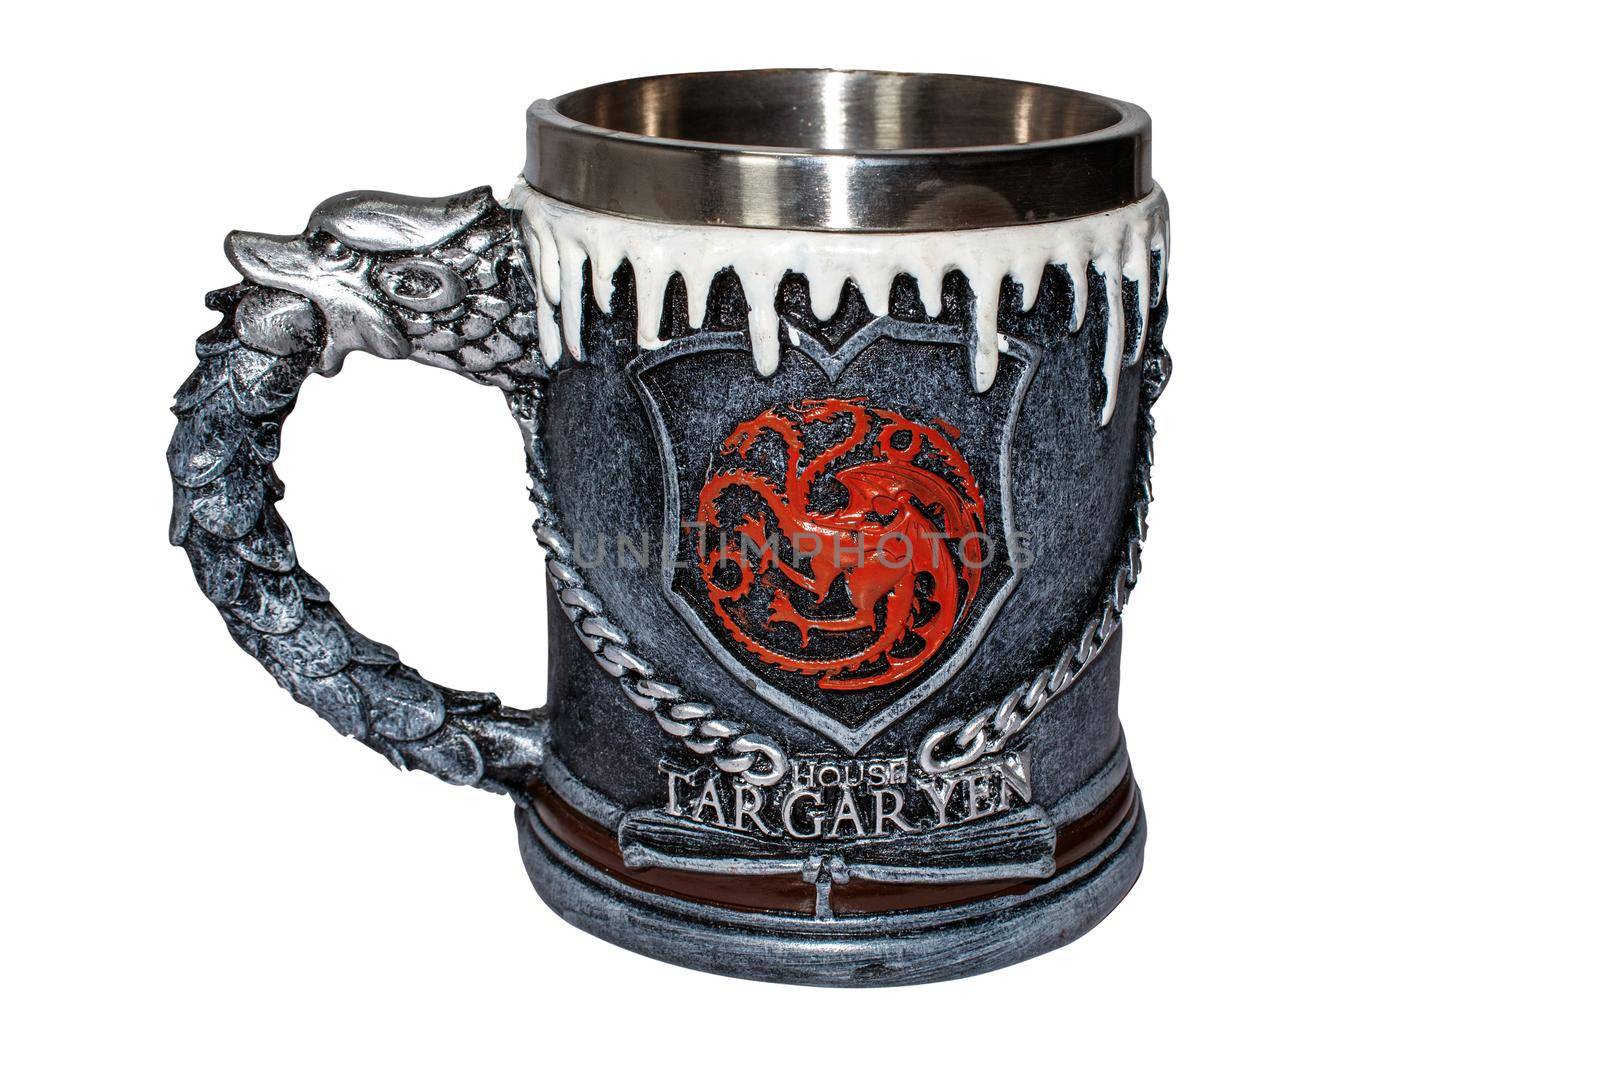 A cup of Game of Thrones with a targaryen cup by bybyphotography